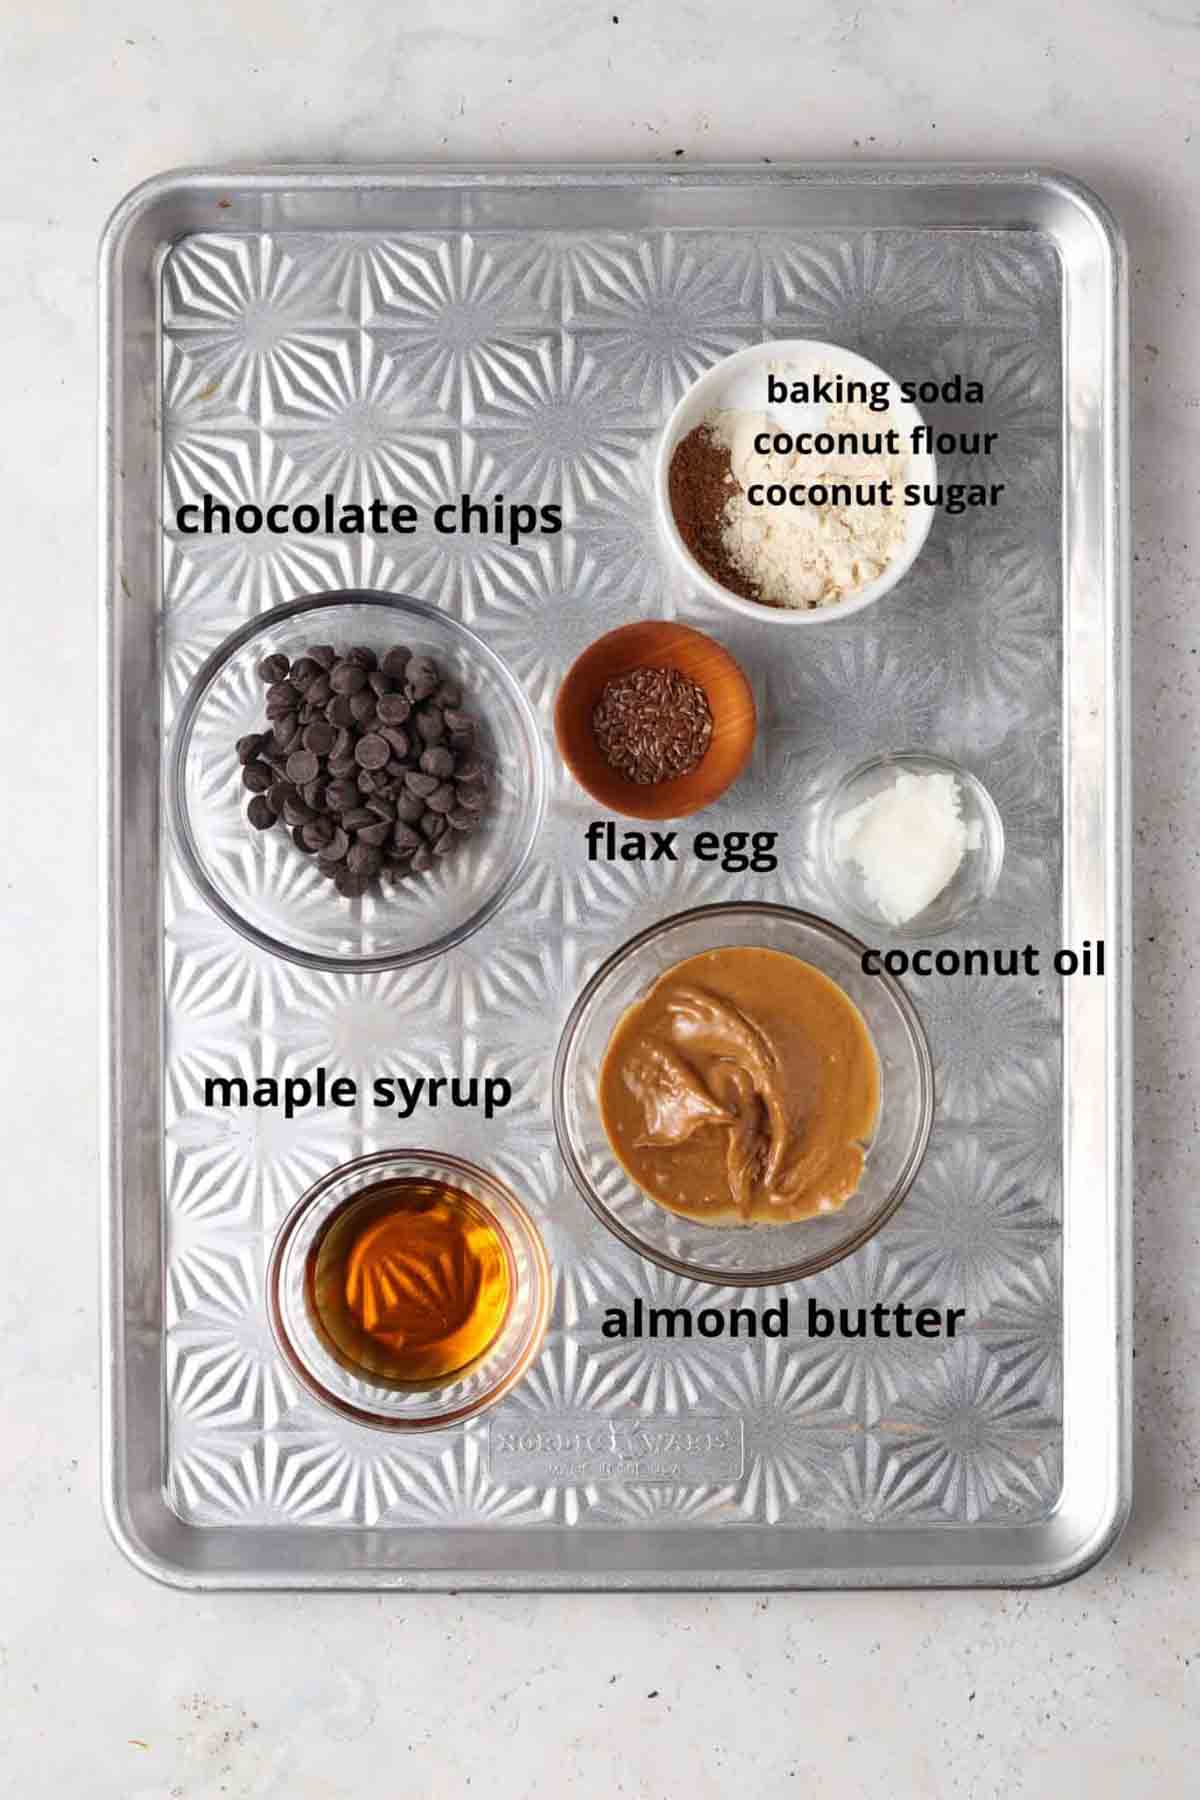 Recipe ingredients laid out on a baking sheet in glass clear bowls.